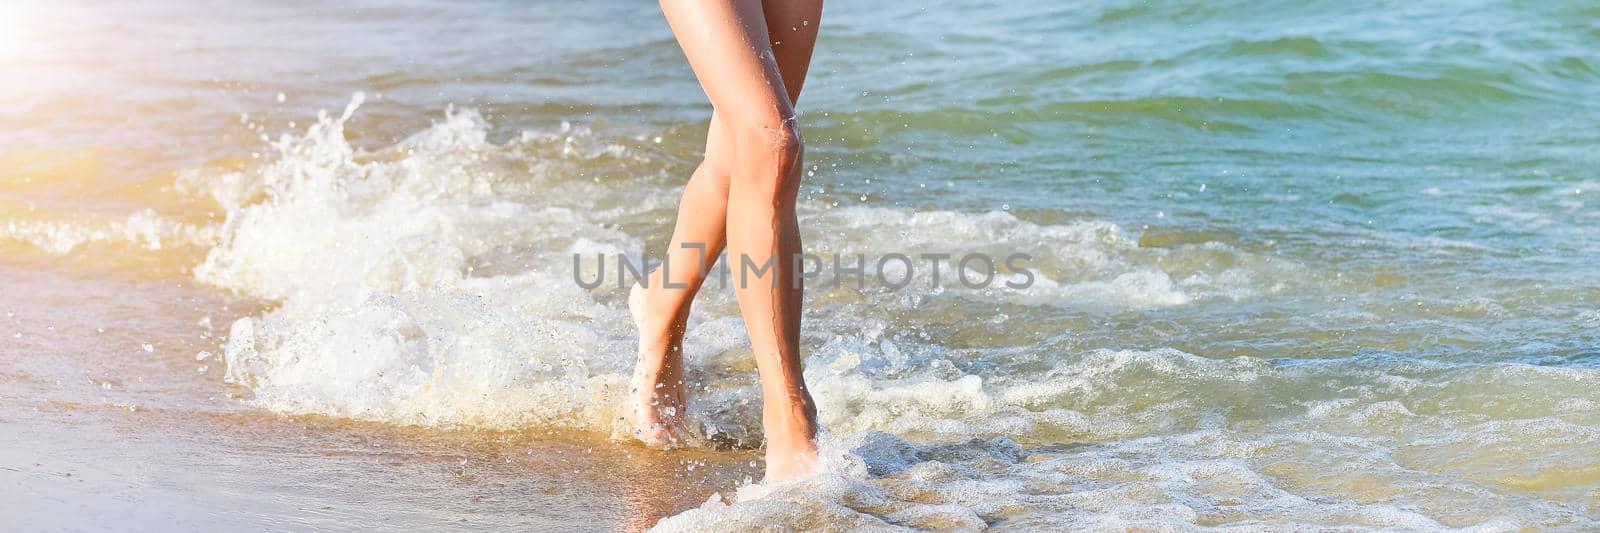 Running girl legs on the sea beach. Long summer banner with copy space. Close up of a young girl's legs walking or running on the beach with waves and seafoam.